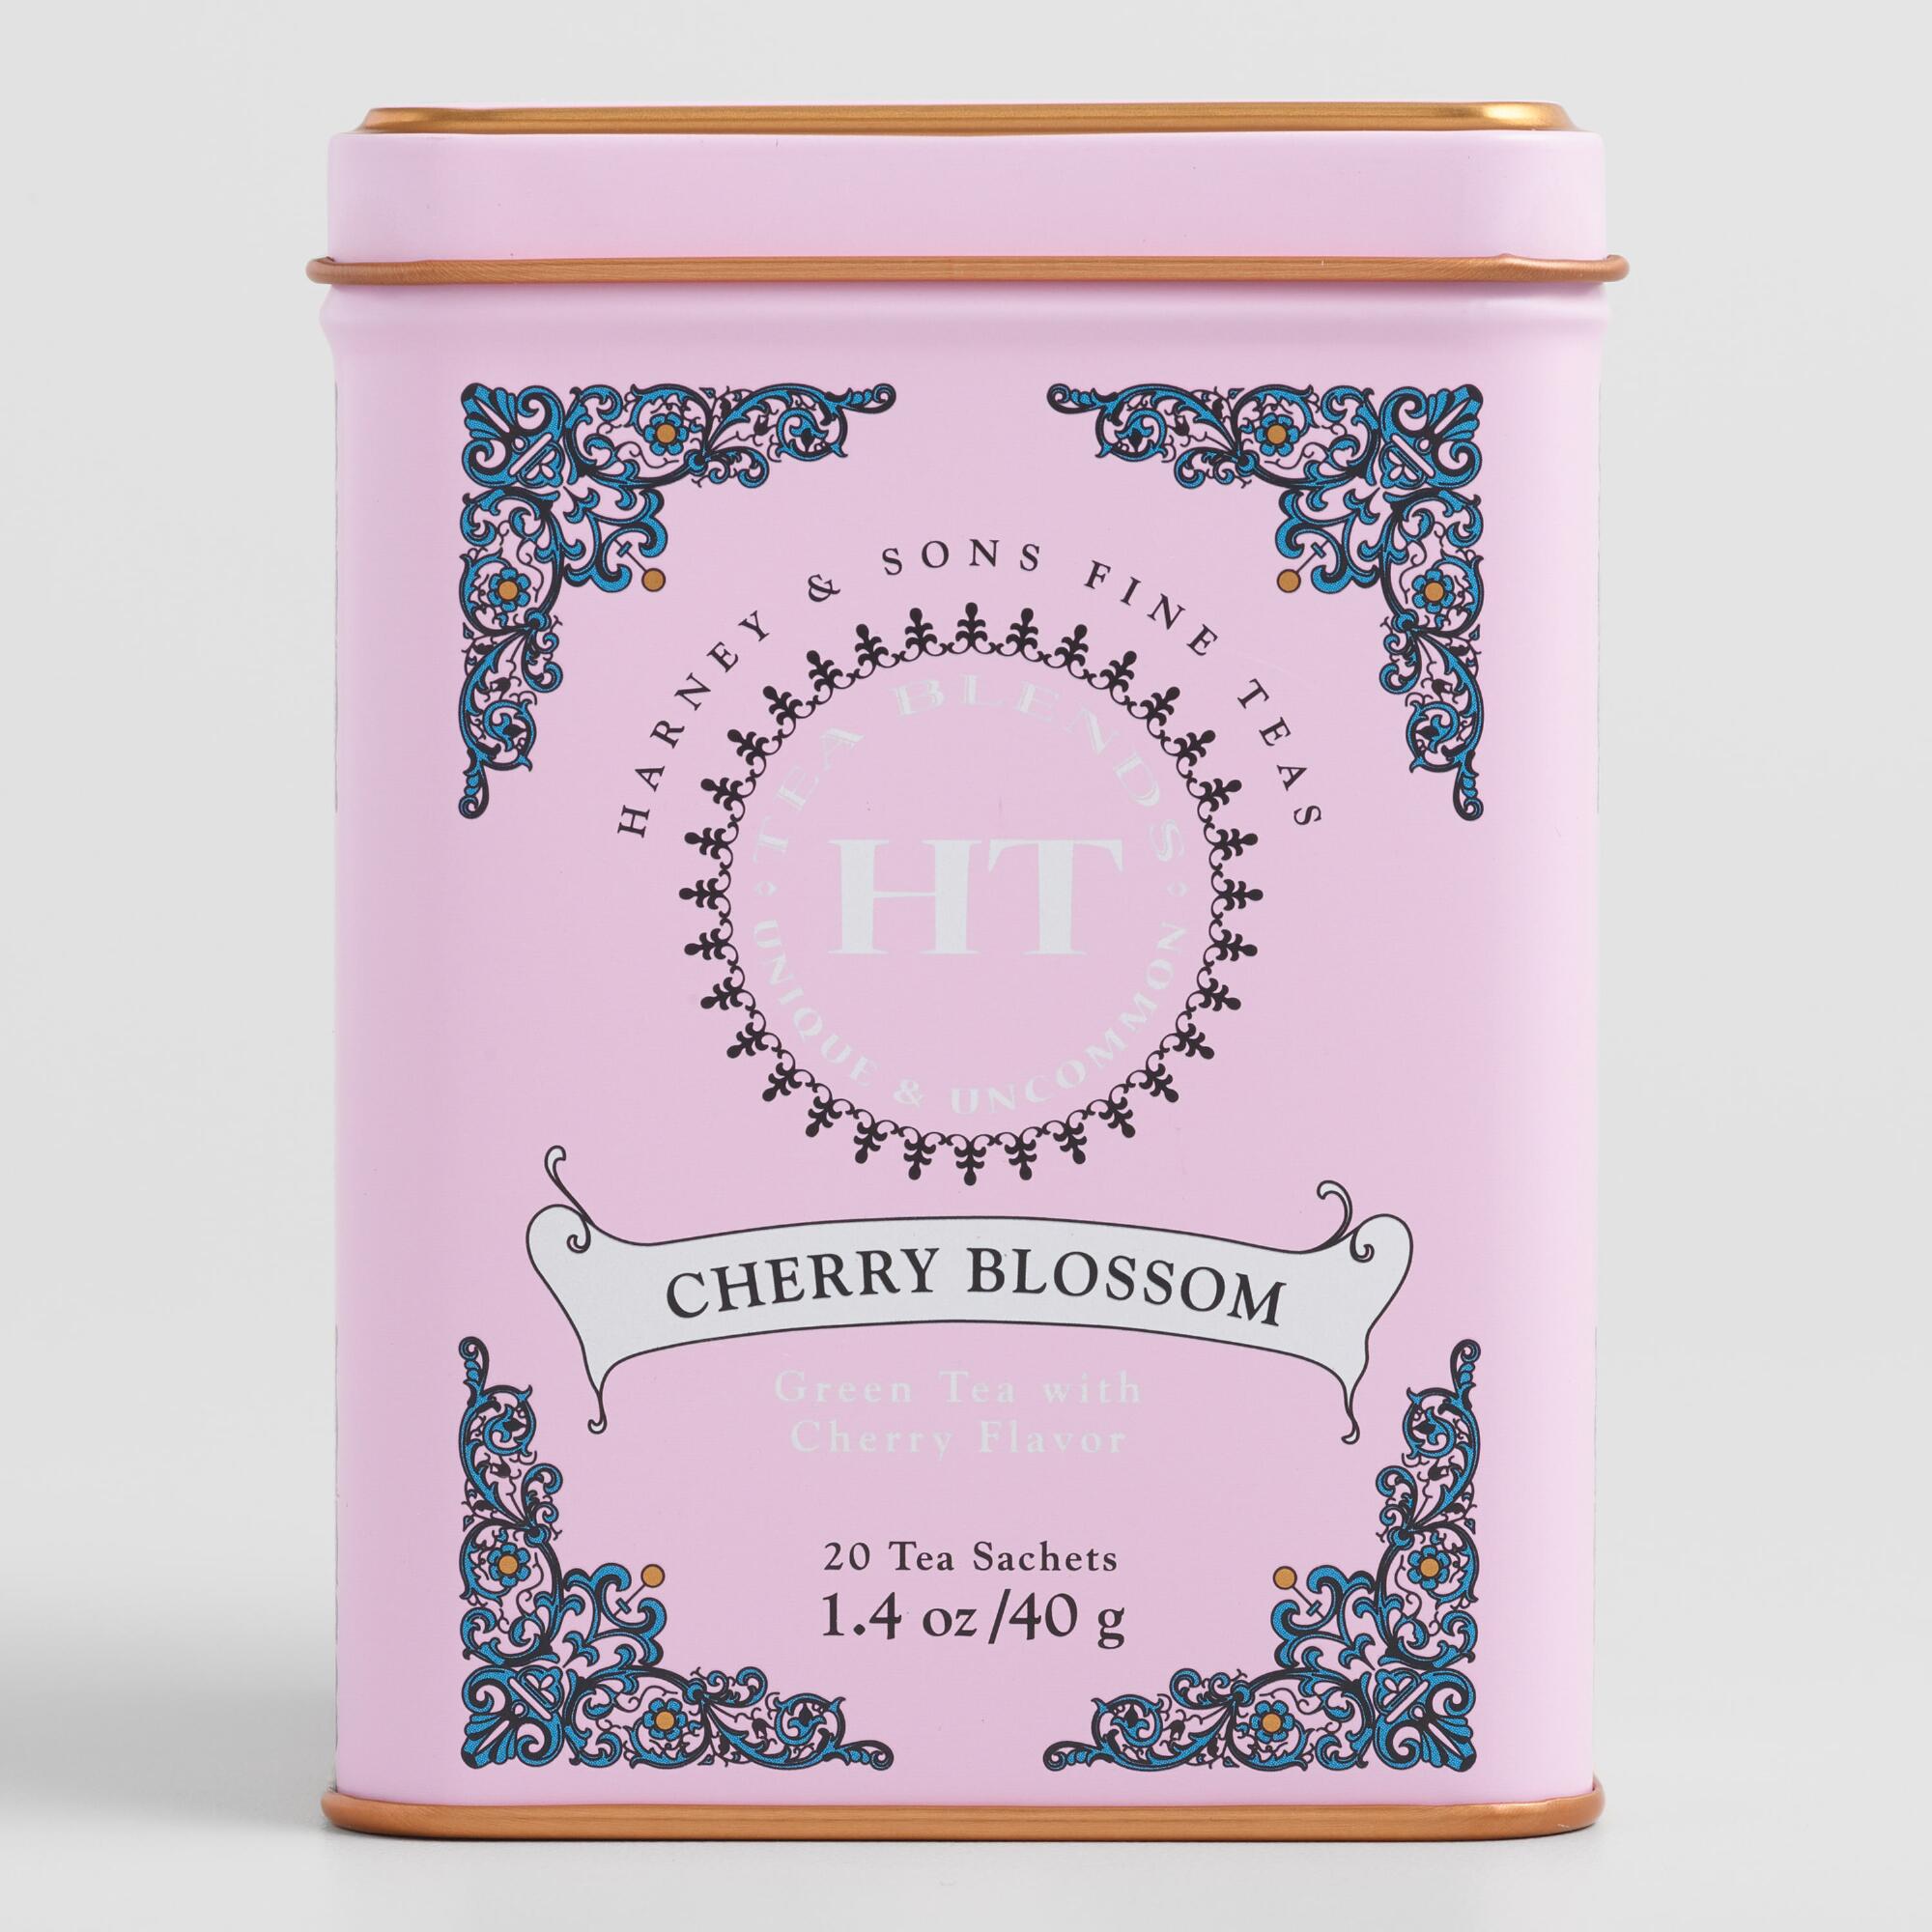 Harney & Sons Cherry Blossom Green Tea Sachets 20 Count by World Market